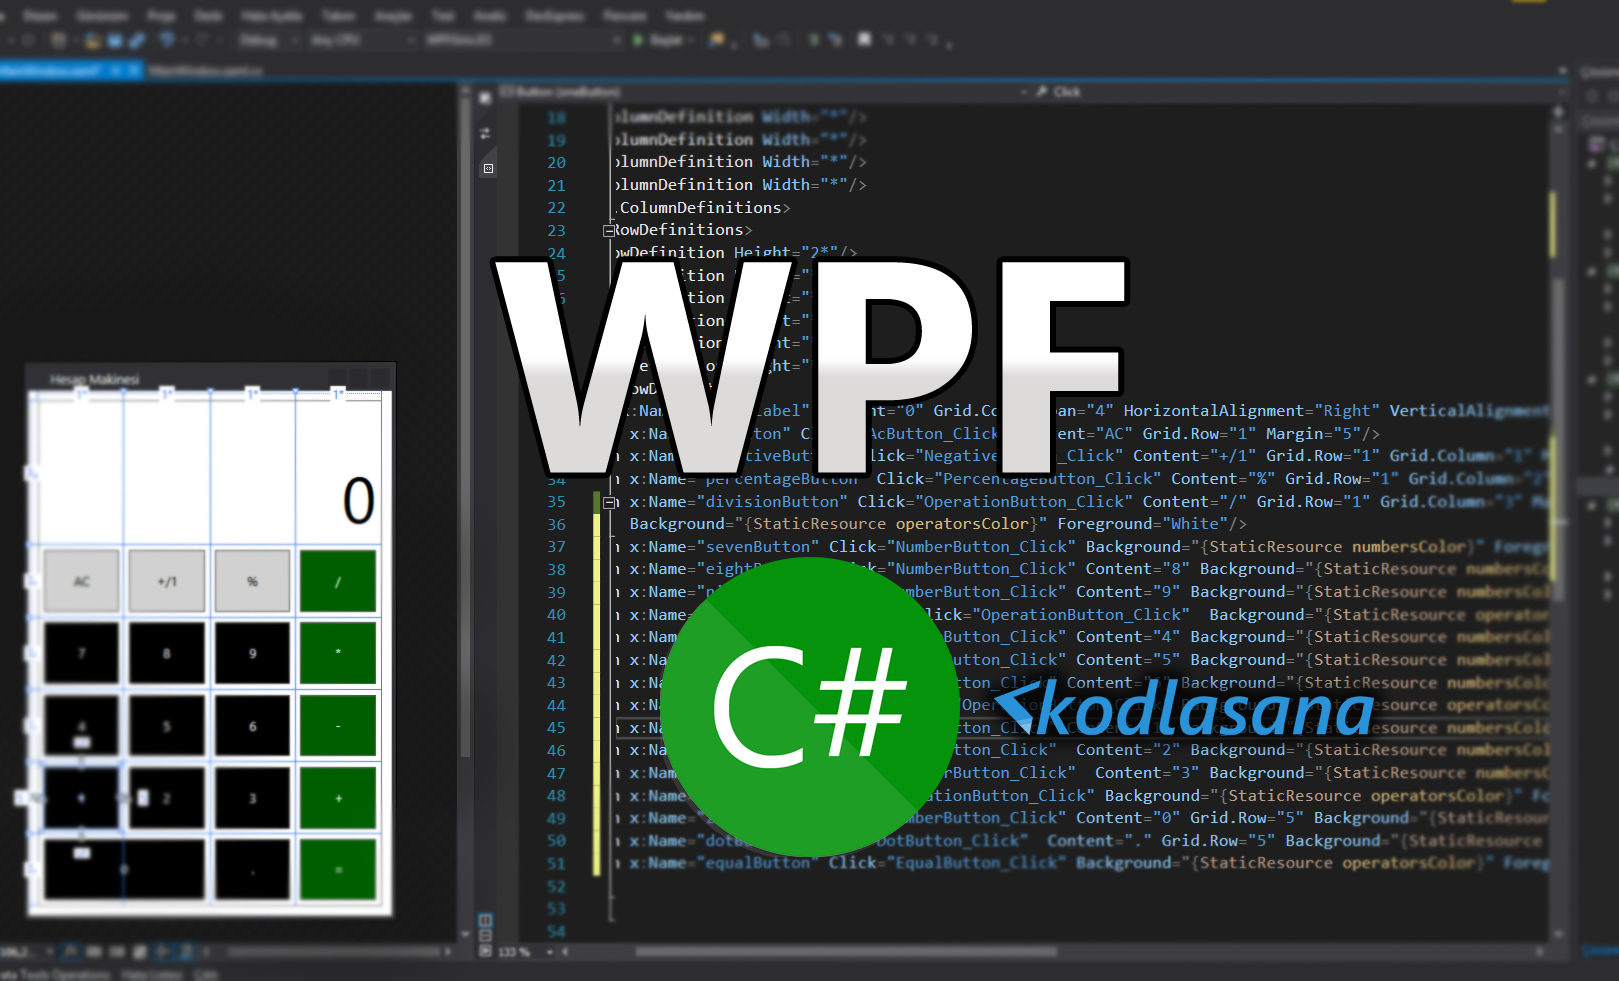 WPF Application-Wide Resources